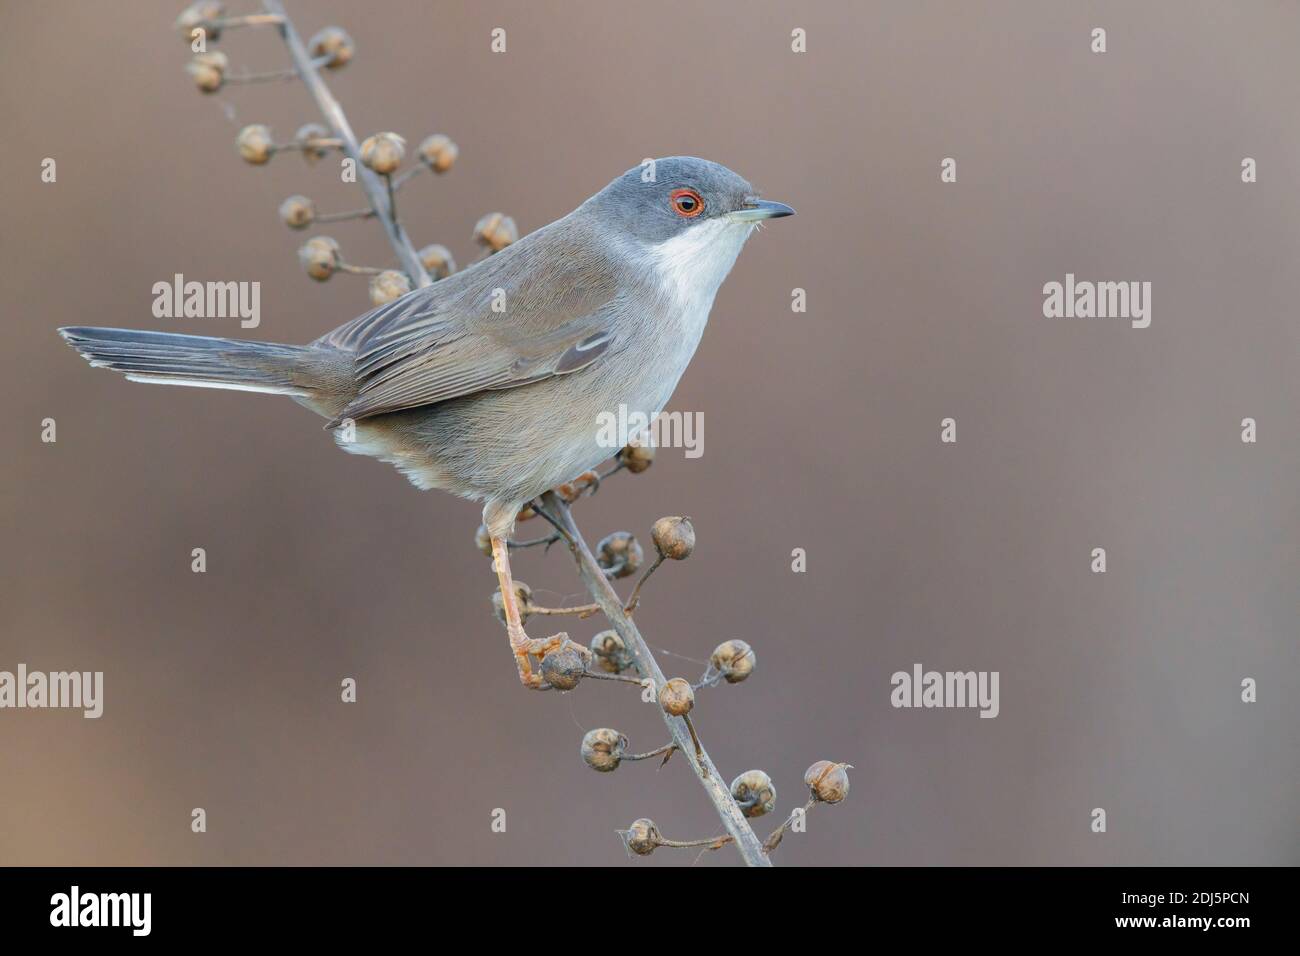 Sardinian Warbler (Sylvia melanocephala), side view of an adult female perched on a stem, Campania, Italy Stock Photo